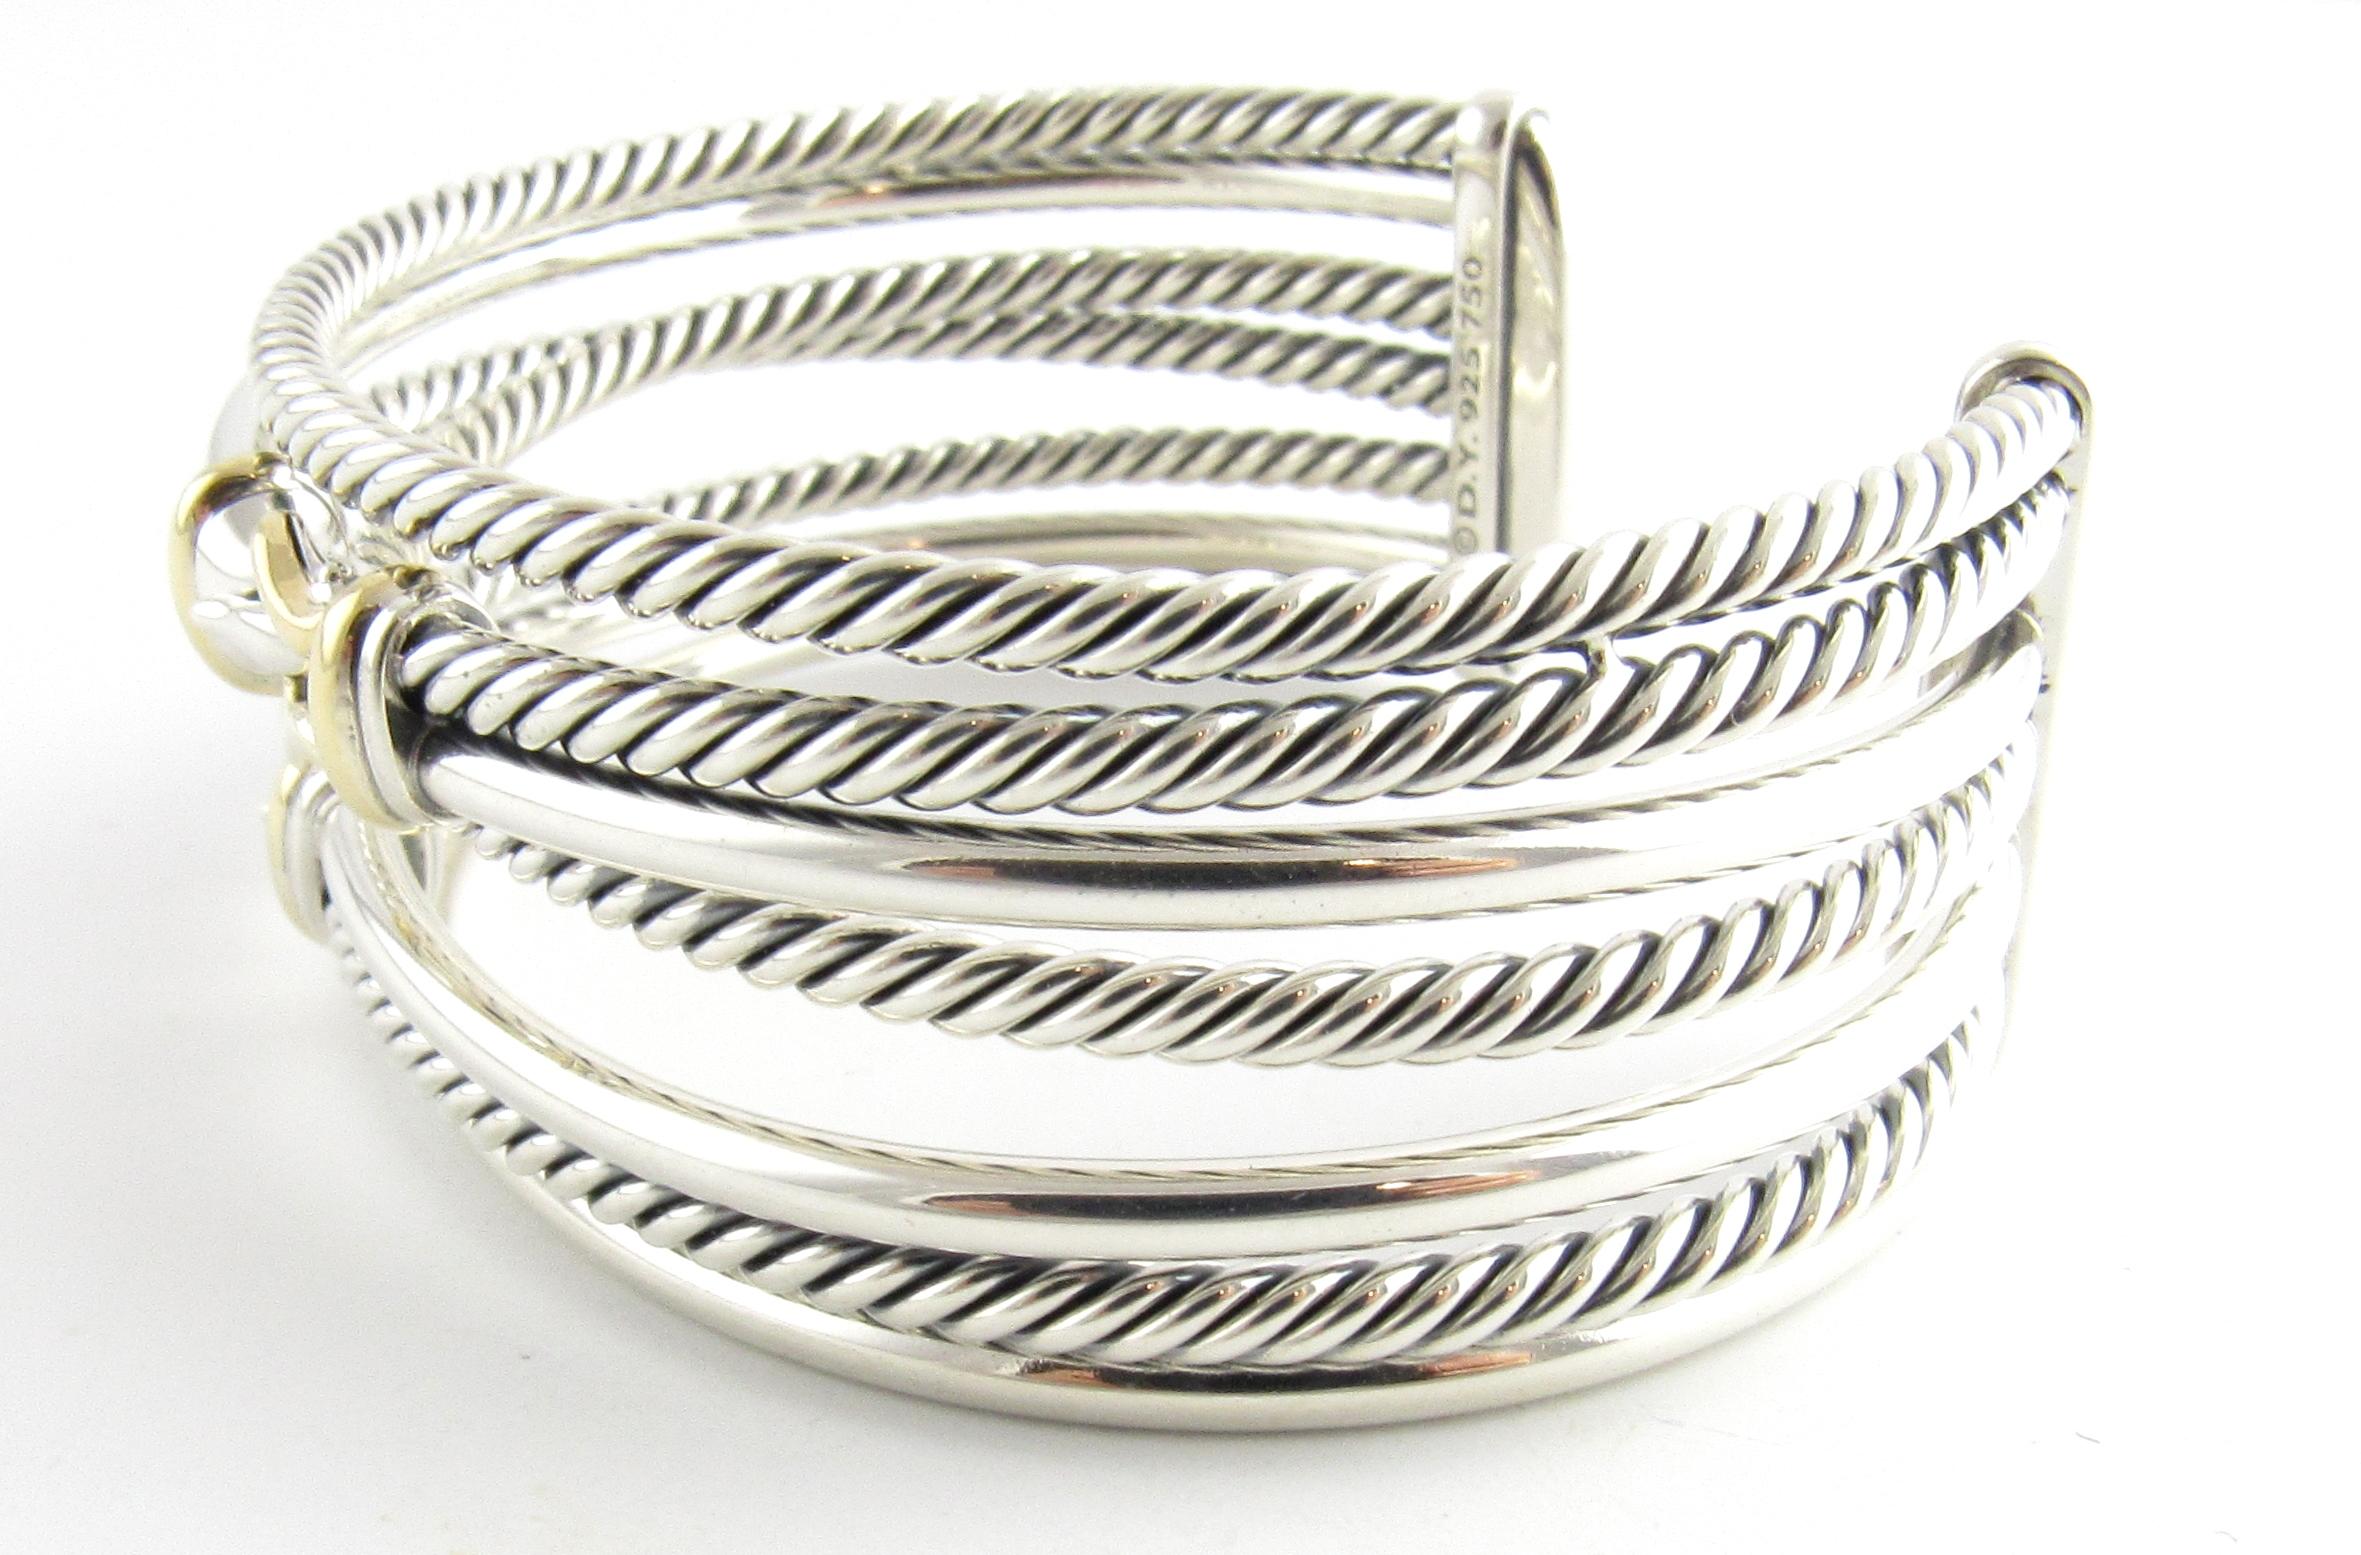 David Yurman Sterling Silver 18K Yellow Gold Buckle Crossover Cuff Bracelet 

This authentic David Yurman cuff bracelet was a gift and only worn once.

Size M

22mm wide

Comes with Box, folder, cleaning cloth, pouch and invoice from